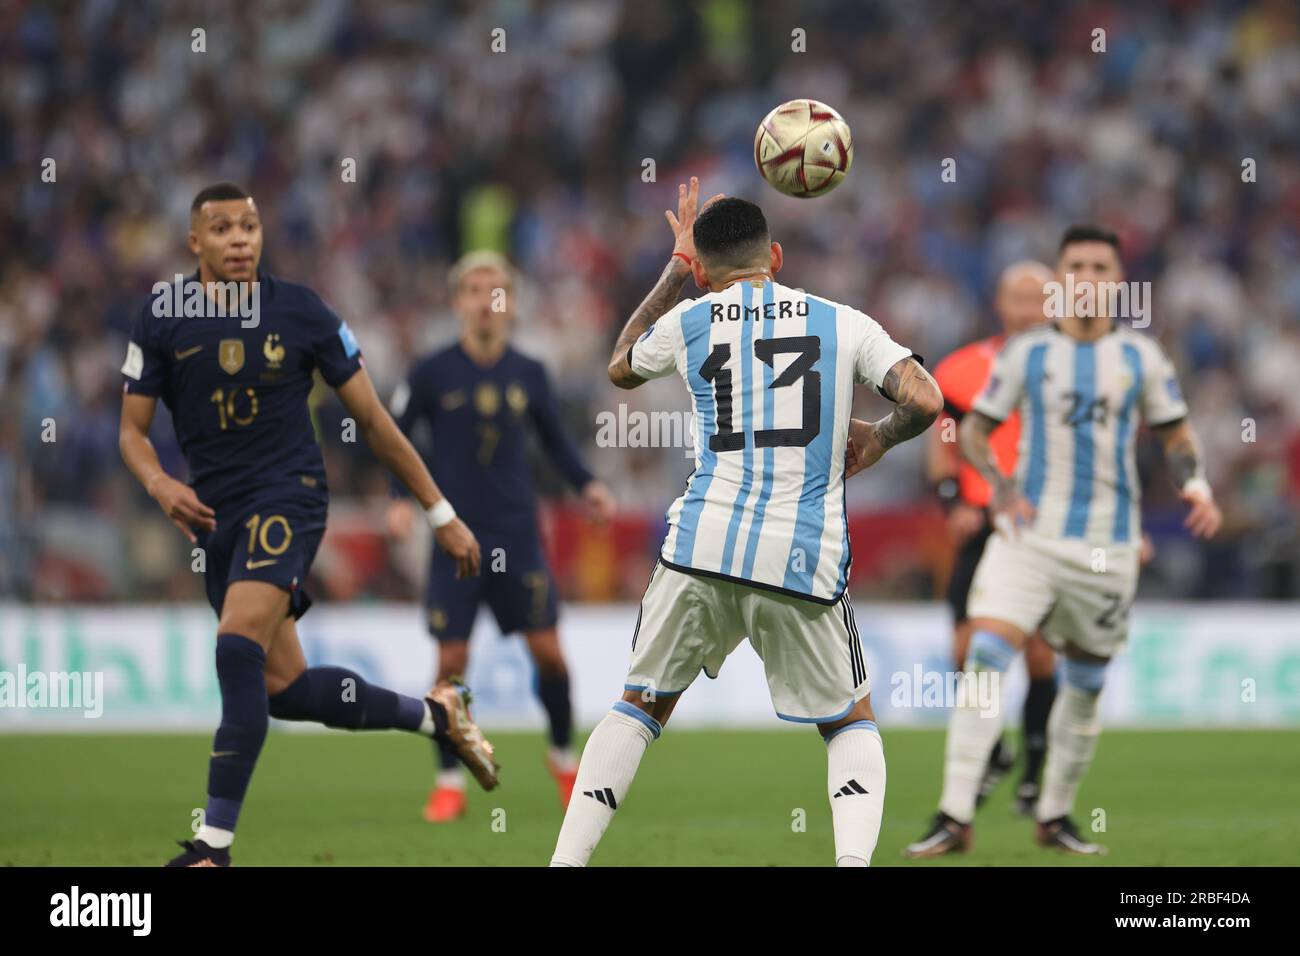 Lusail, Qatar, 18th. December 2022.Cristian Romero heading the ball during the match between Argentina vs. France, Match 64, Final match of the Fifa W Stock Photo